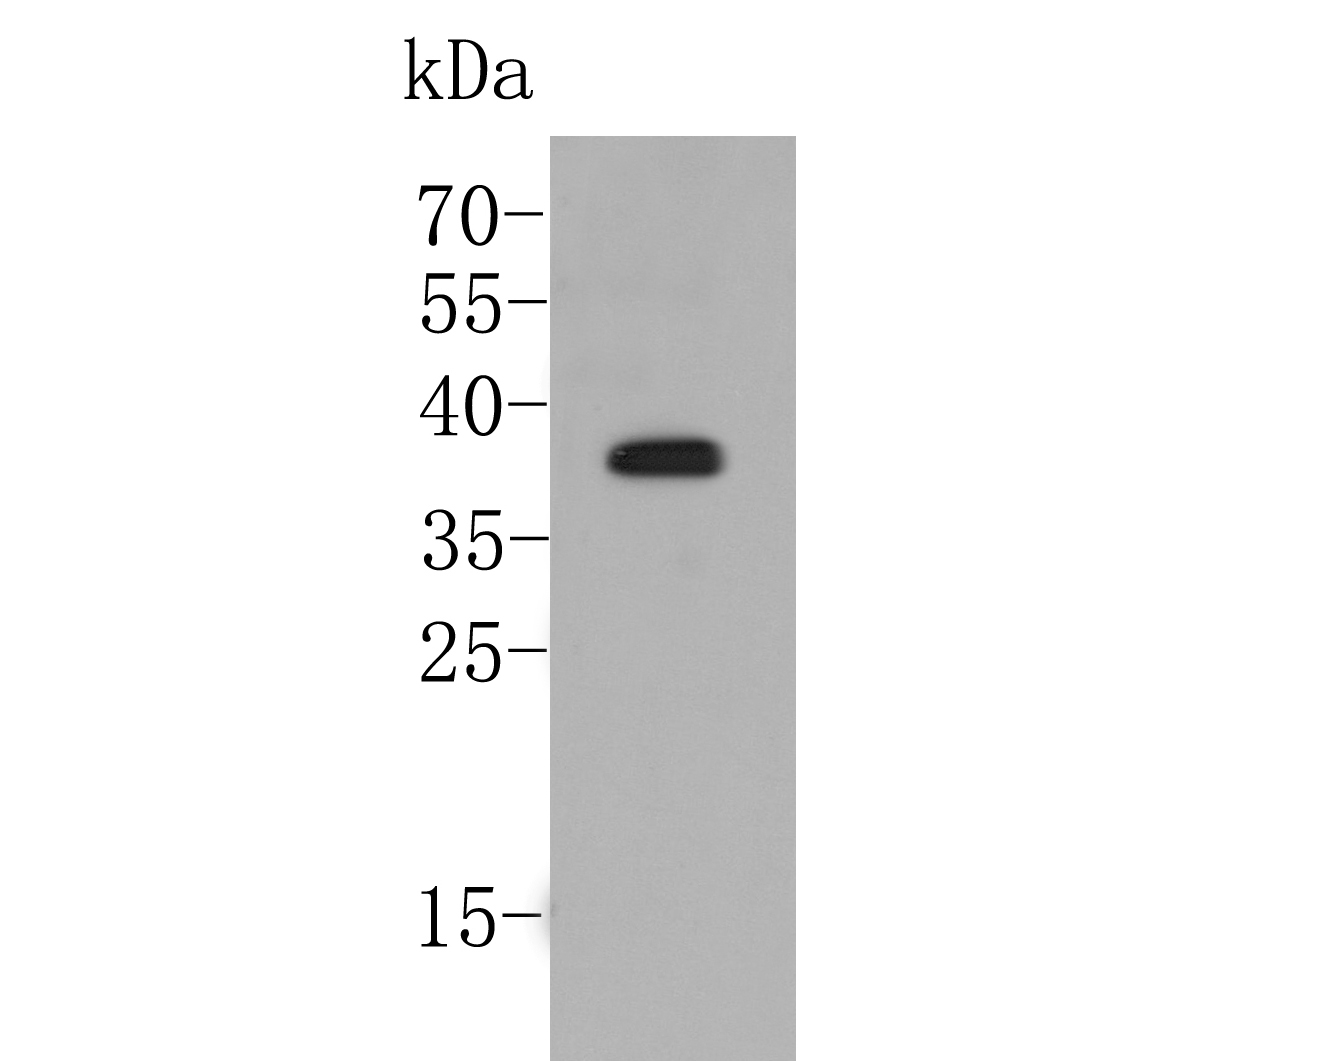 Fig1:; Western blot analysis of D14 on rice tissue lysate. Proteins were transferred to a PVDF membrane and blocked with 5% BSA in PBS for 1 hour at room temperature. The primary antibody ( 1/500) was used in 5% BSA at room temperature for 2 hours. Goat Anti-Rabbit IgG - HRP Secondary Antibody (HA1001) at 1:5,000 dilution was used for 1 hour at room temperature.